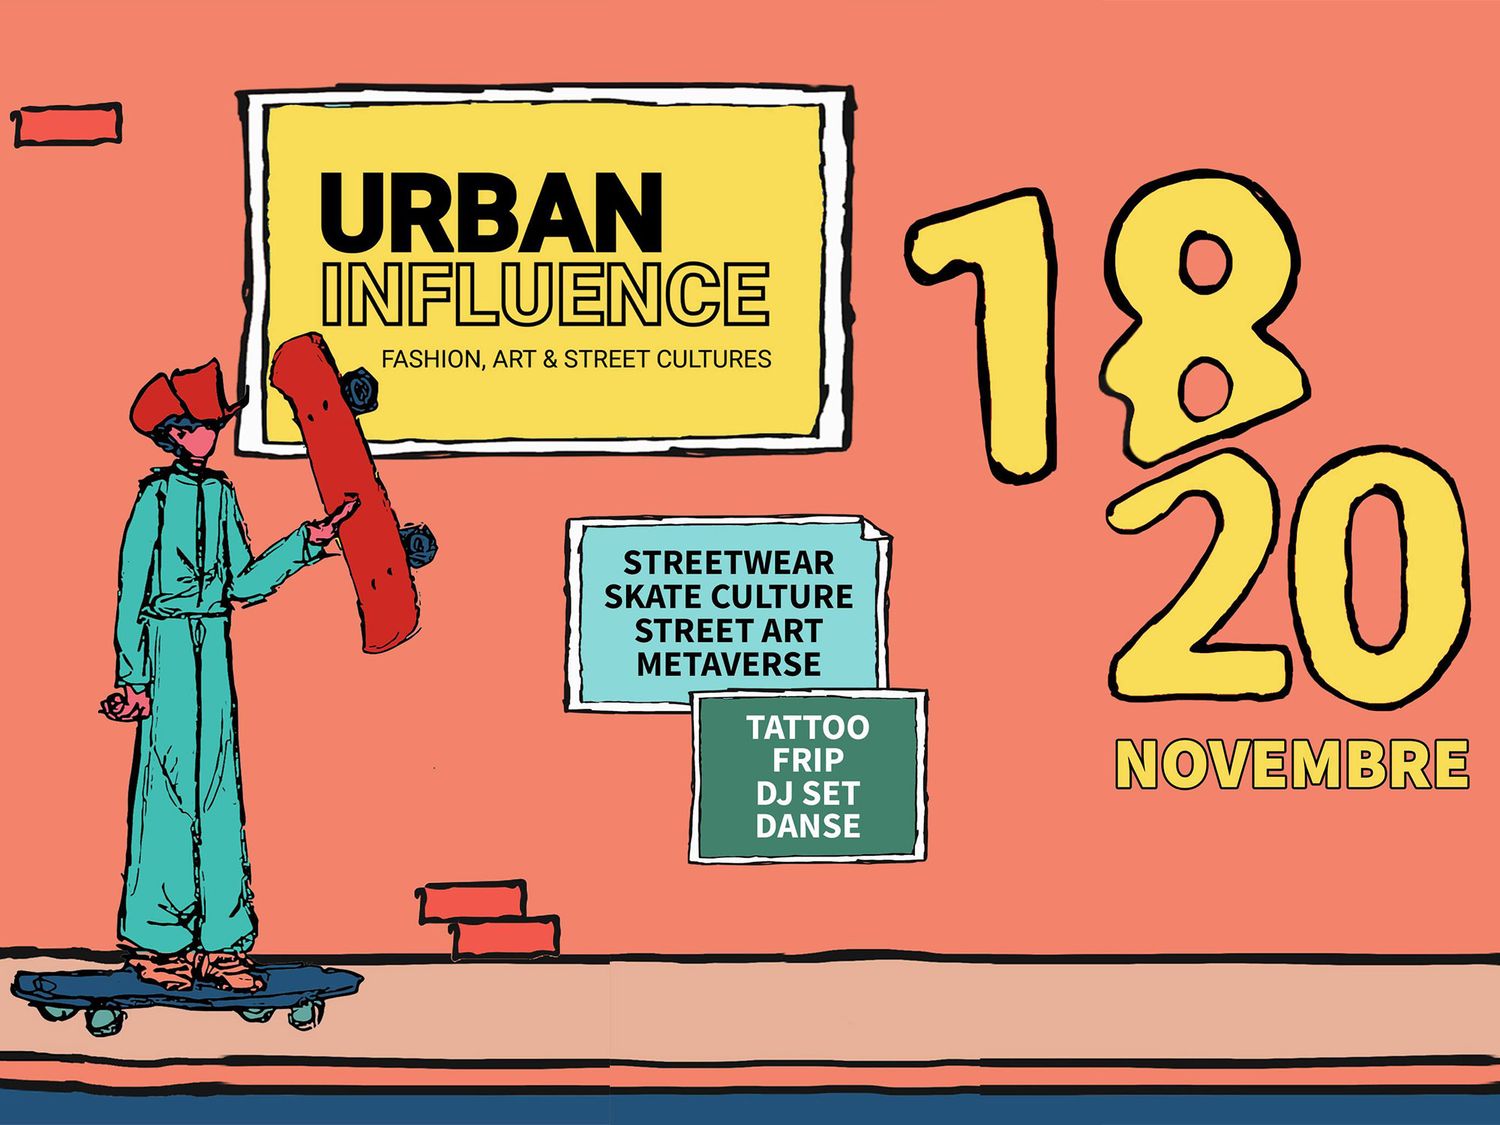 For this first edition, Urban Influence will propose an original program representative of urban cultures with many surprises during 3 days, from November 18th to 20th.